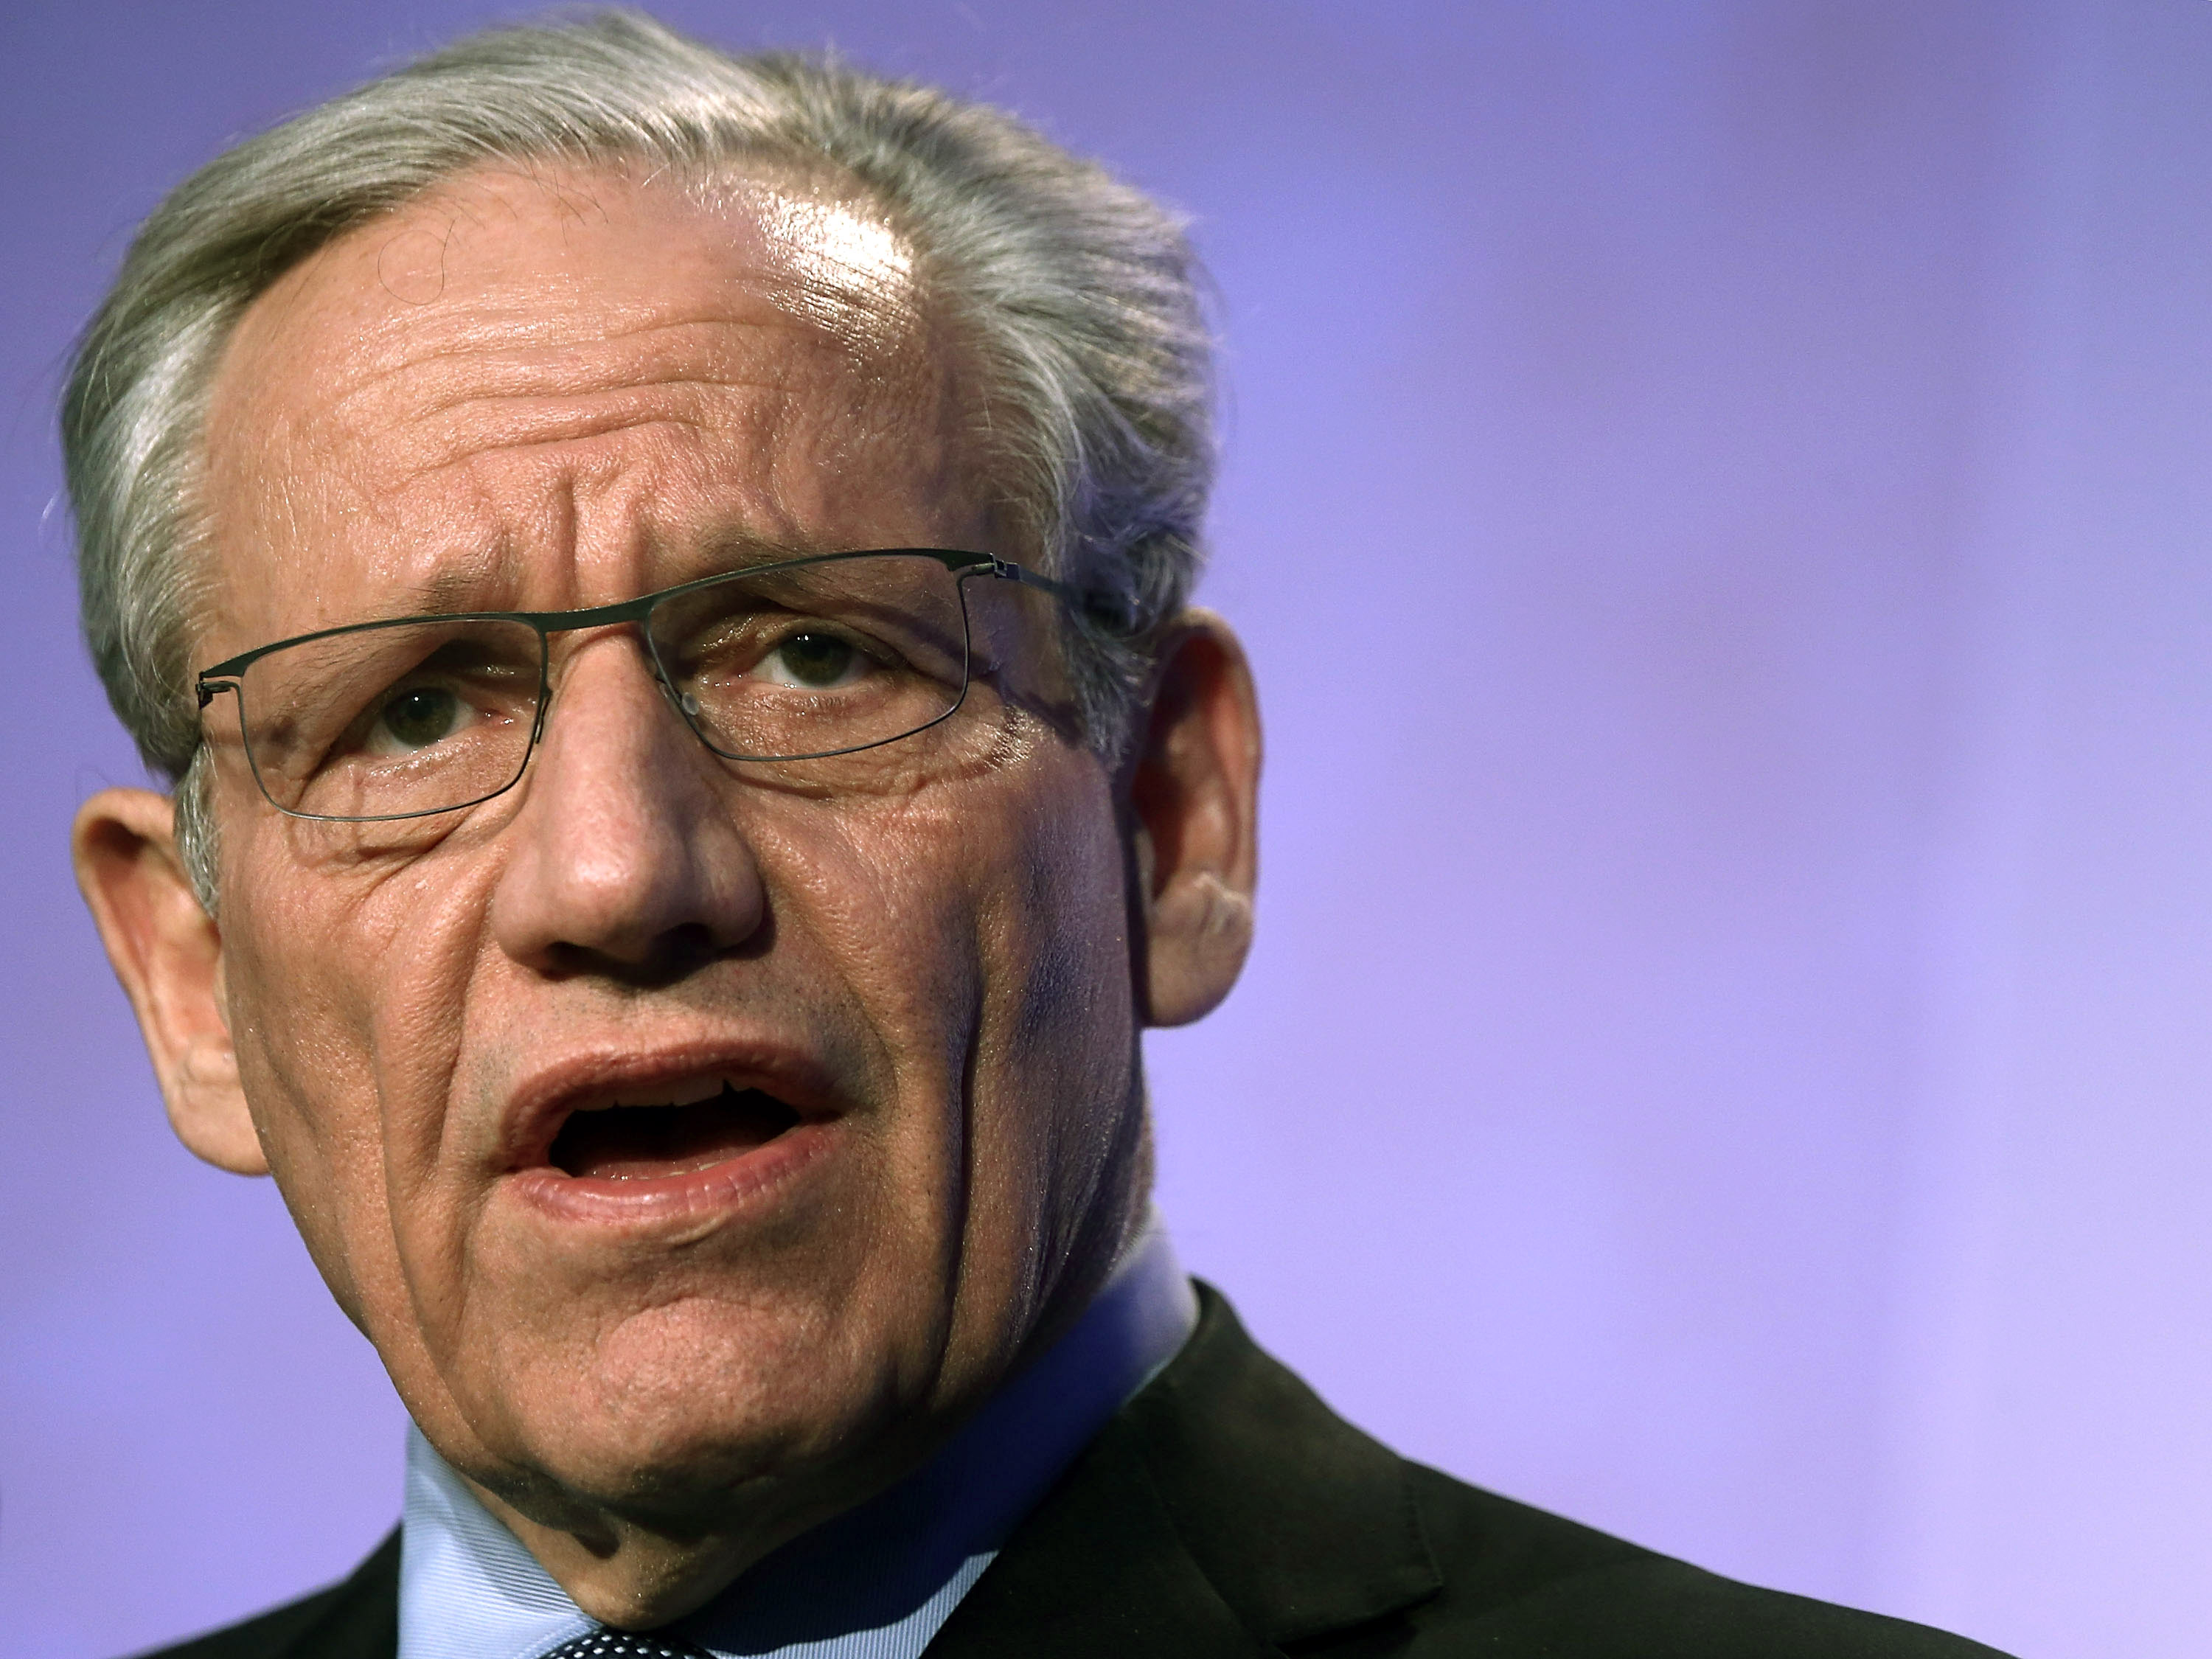 Bob Woodward: Bin Laden should have read my book more closely